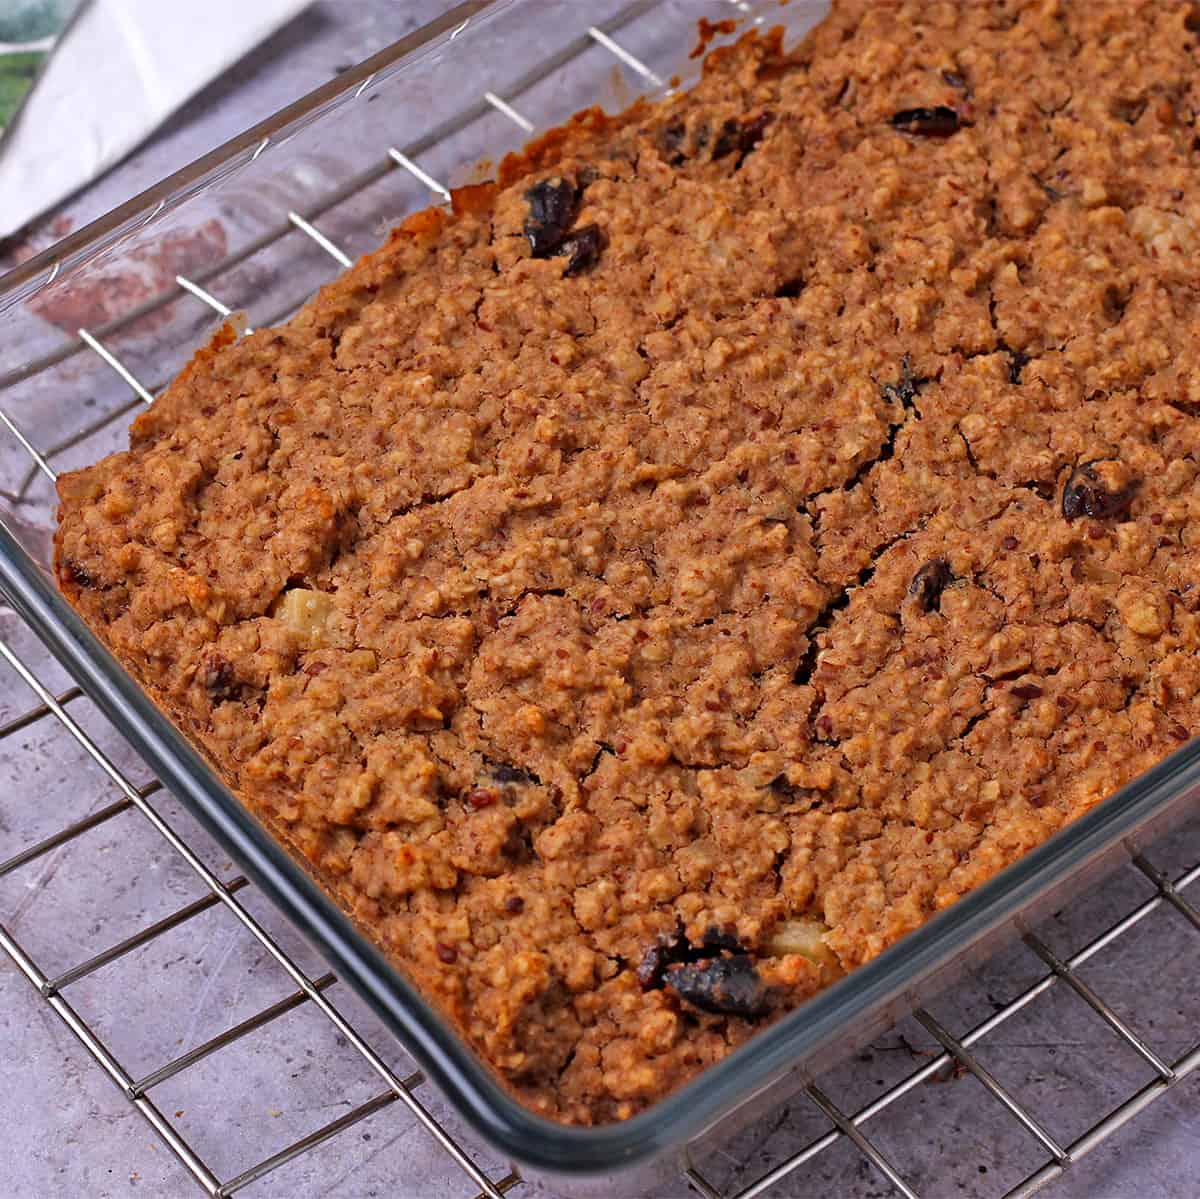 Baked oatmeal in a glass baking dish on a wire rack.